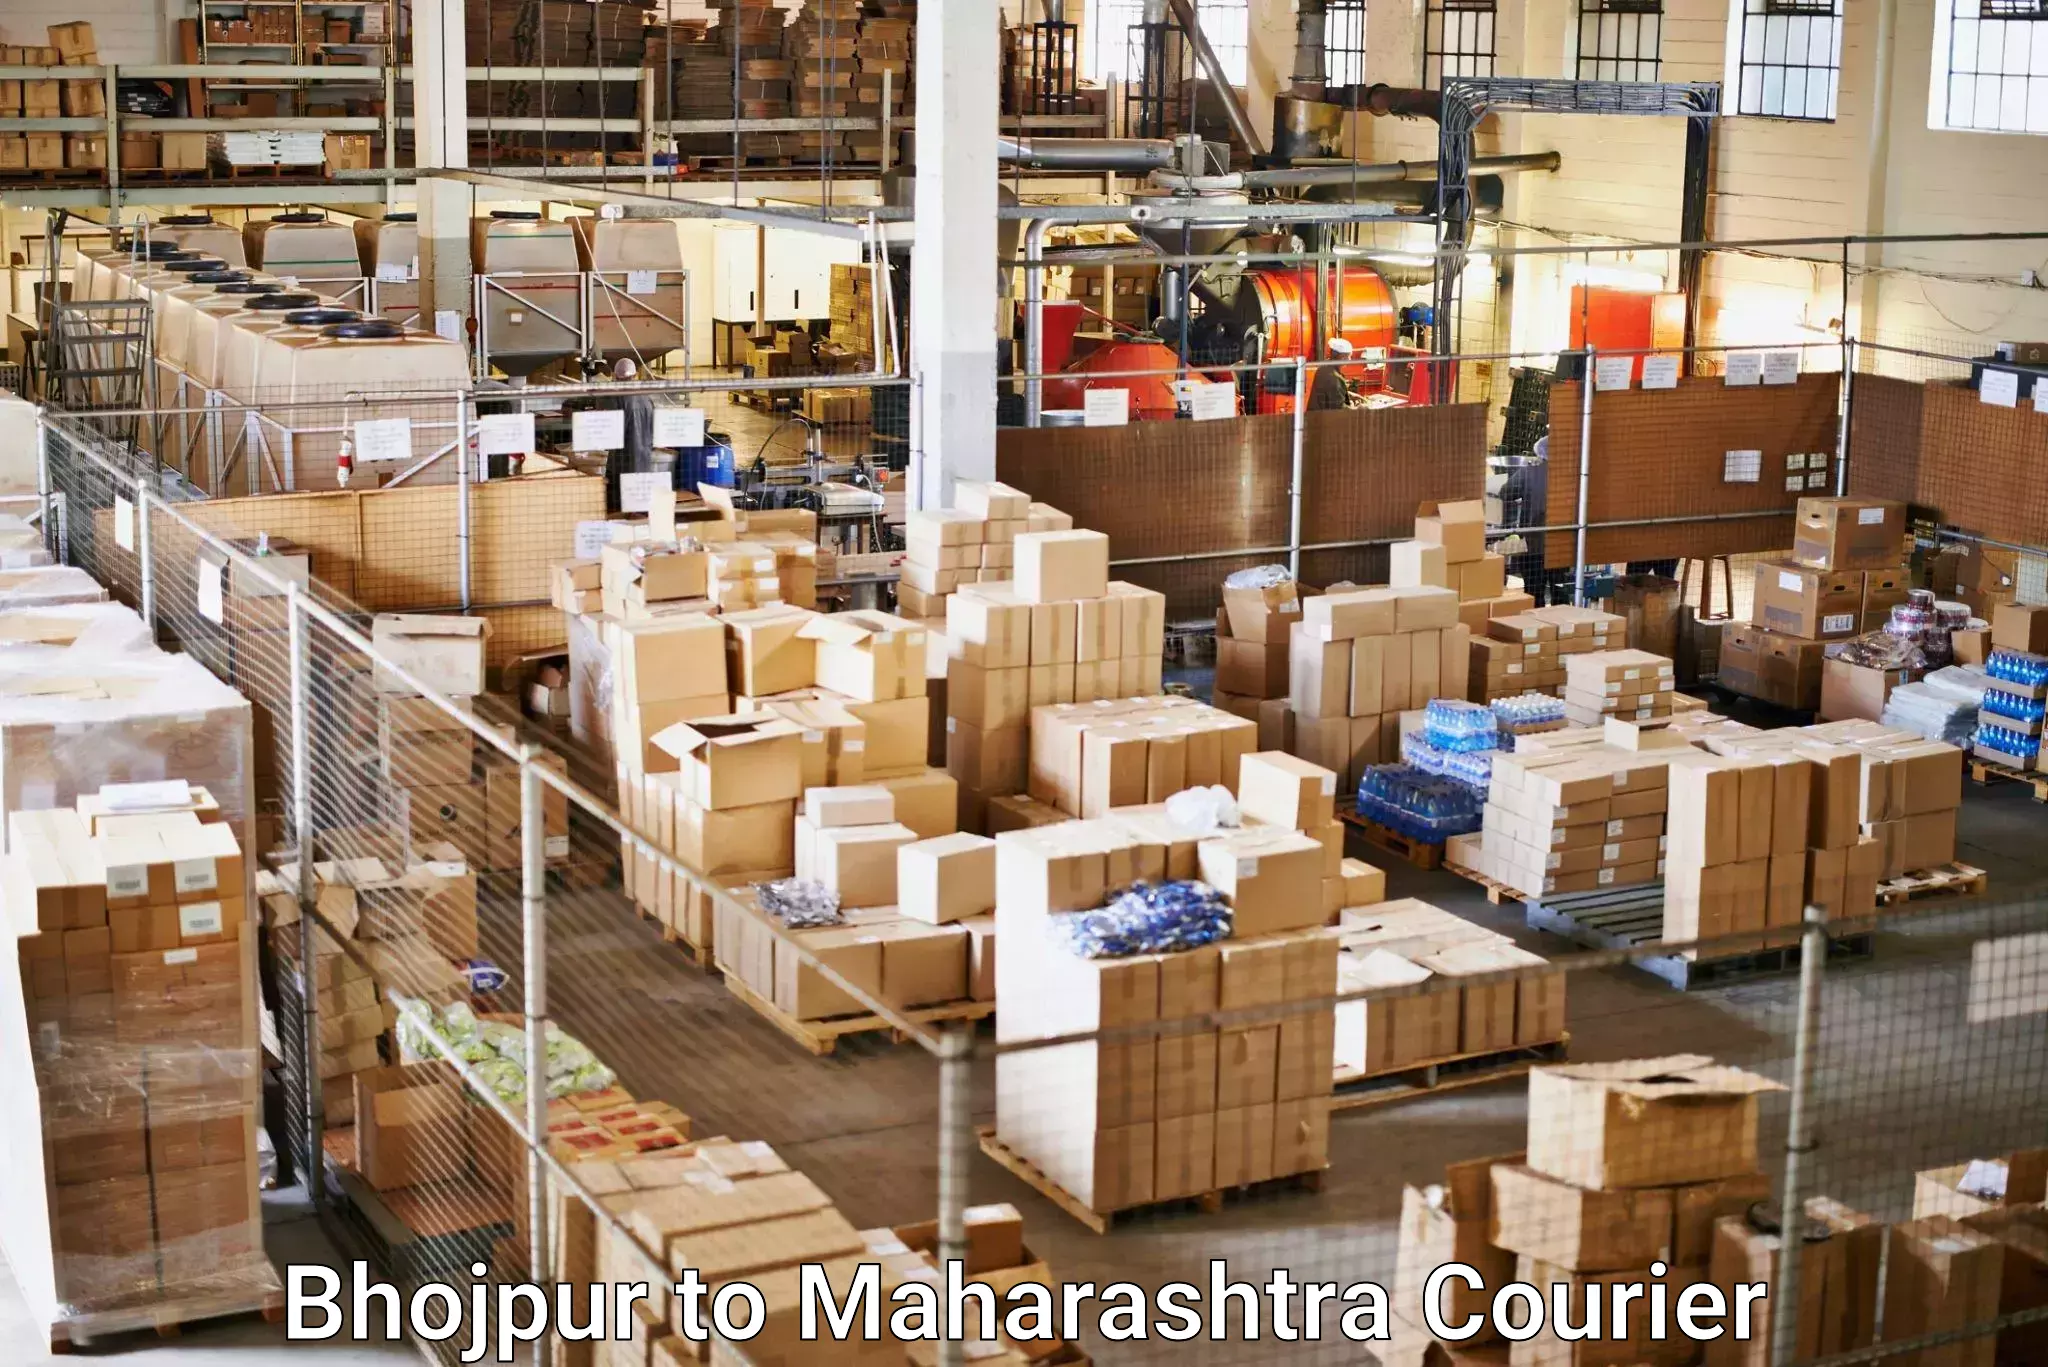 Secure shipping methods Bhojpur to Alephata